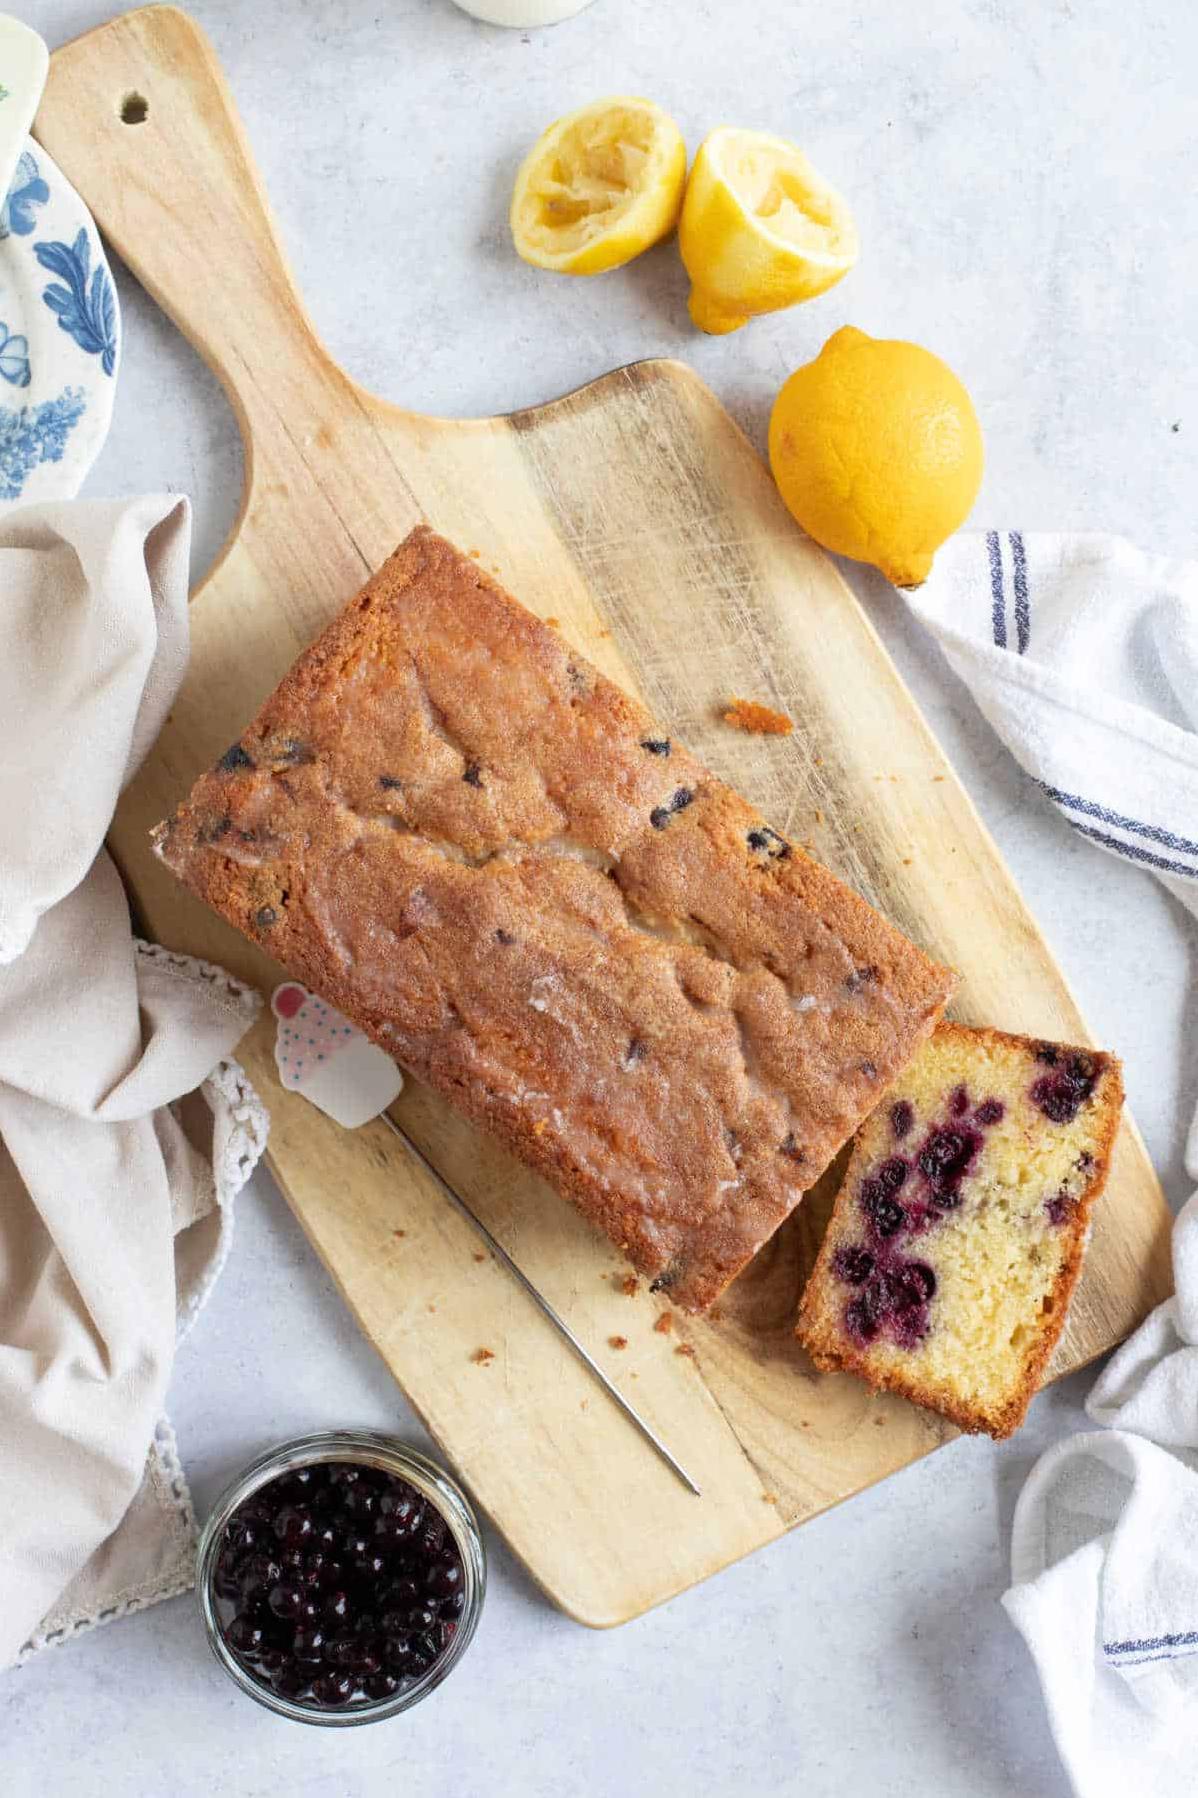  Tart and juicy black currants give this cake a burst of flavor.